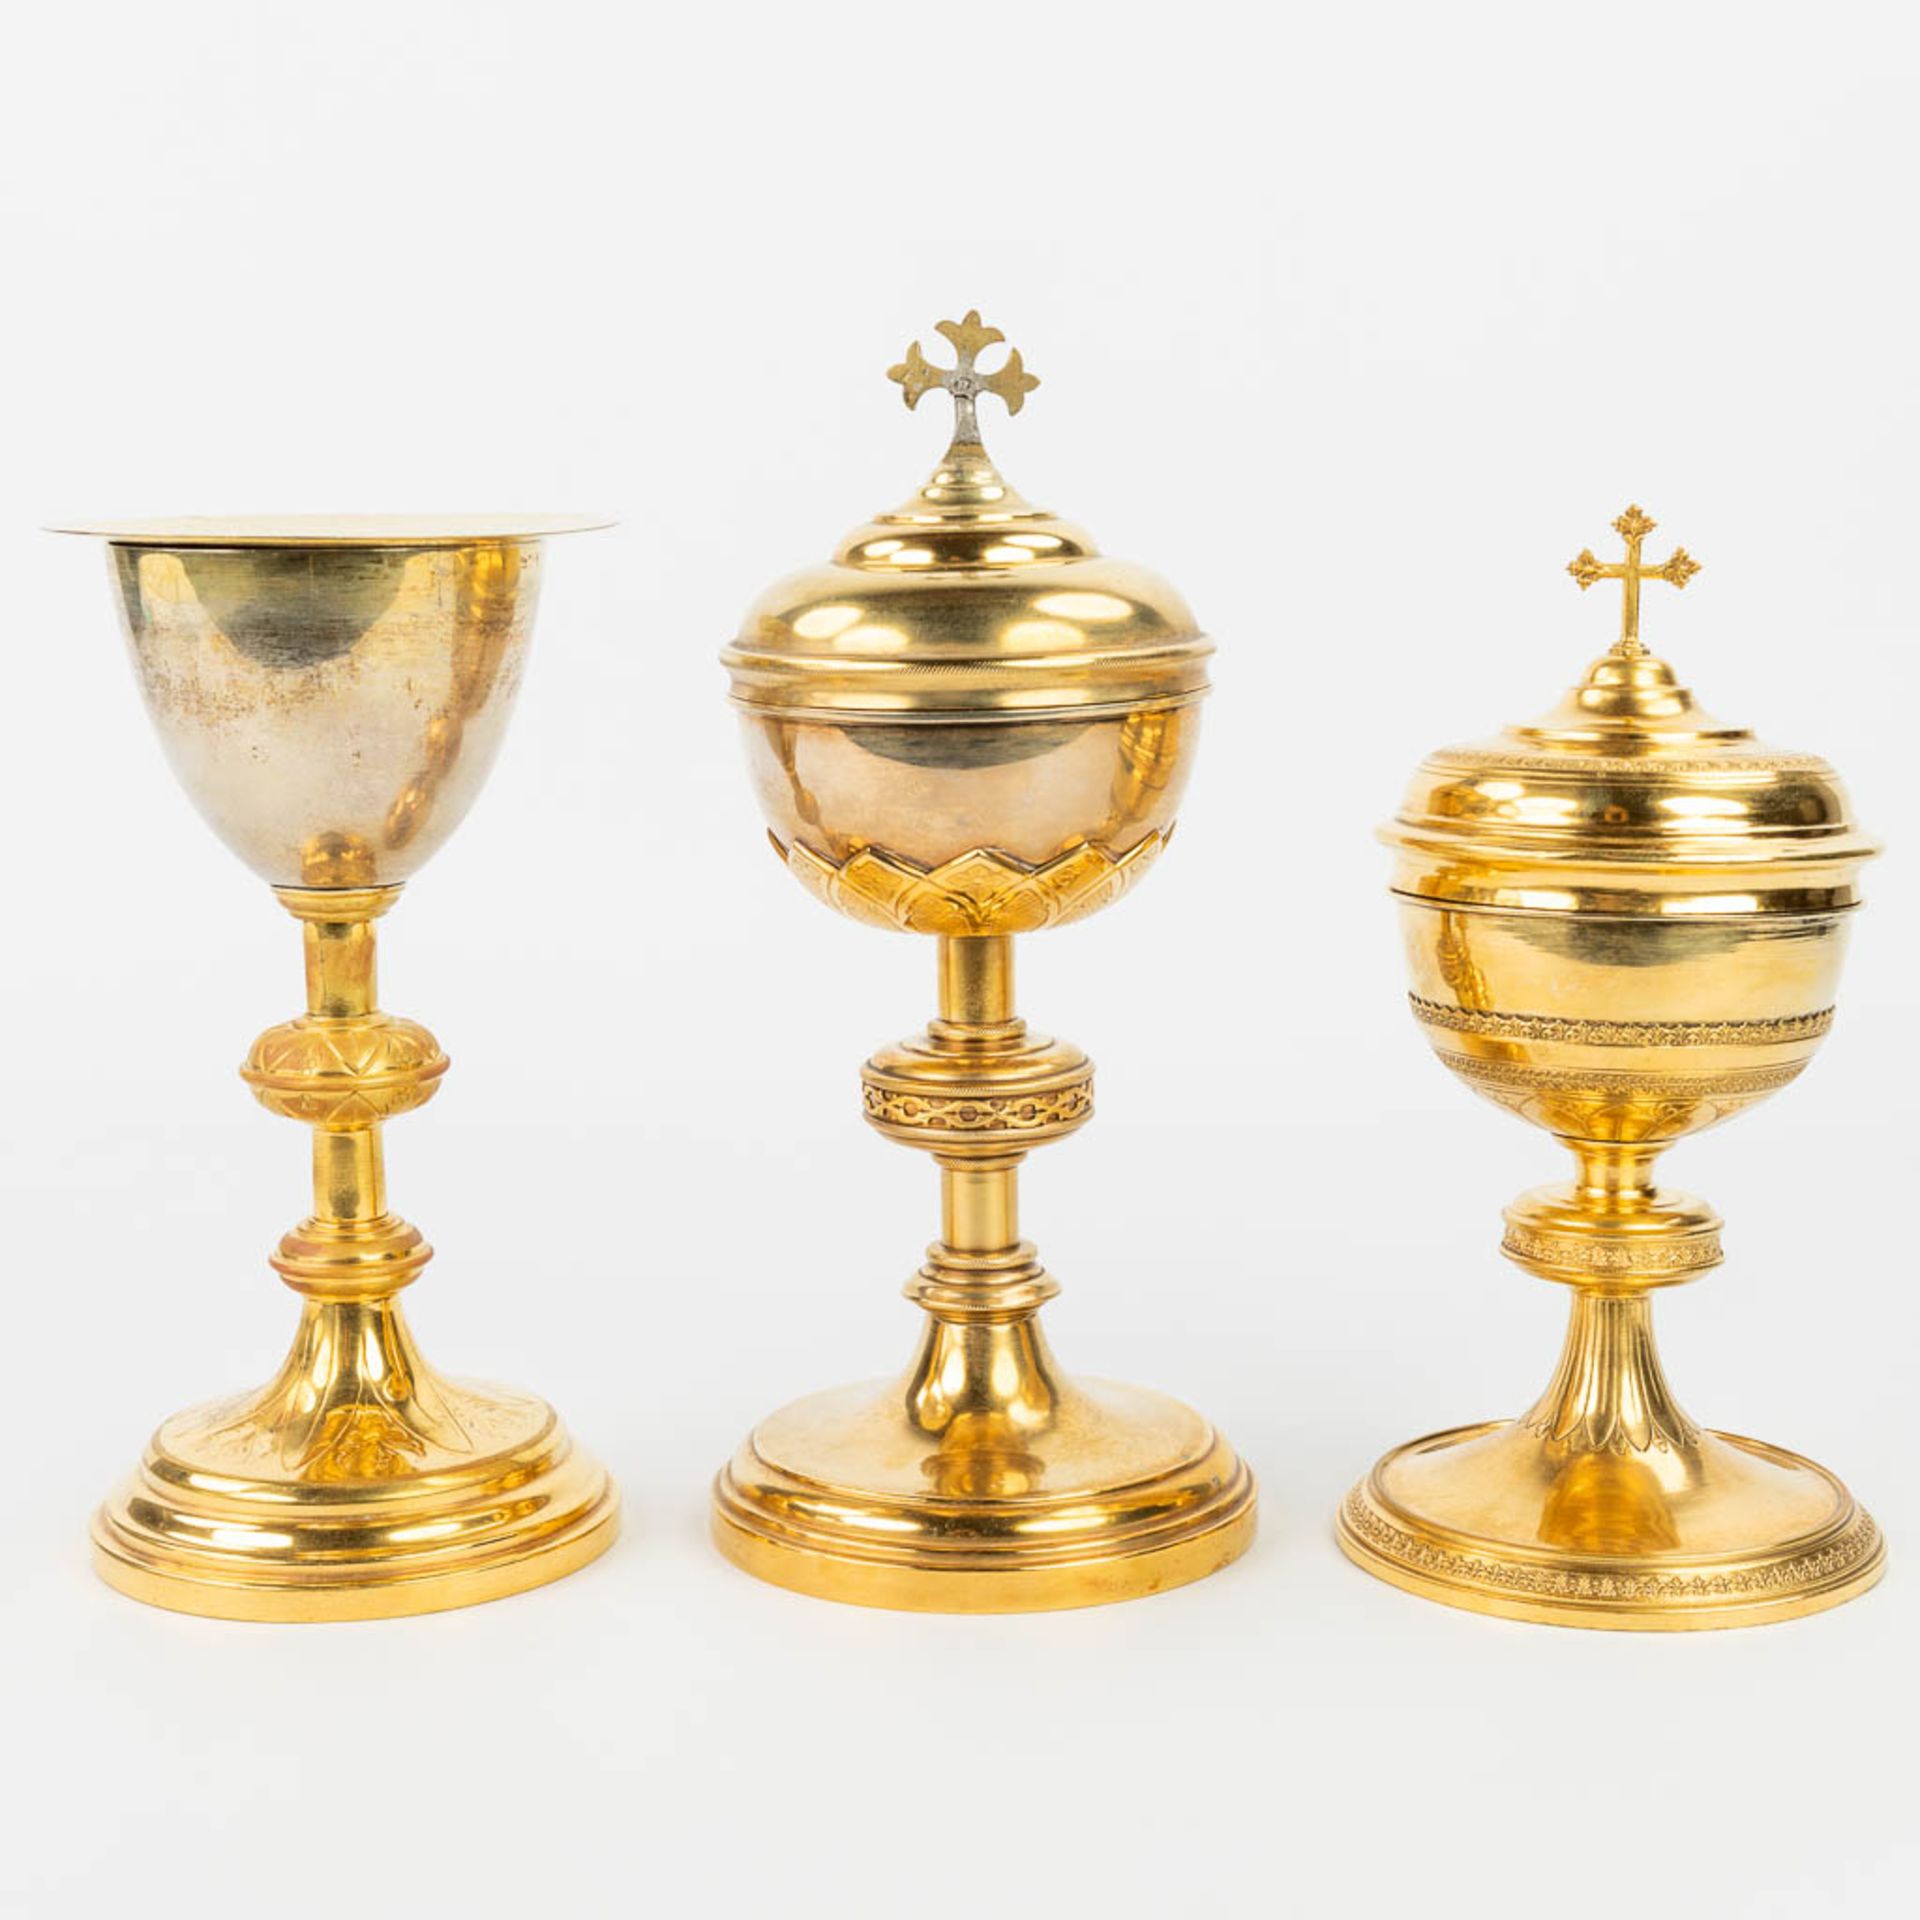 A collection of 4 large ciboria and a chalice made of silver and gold plated metal. - Image 17 of 24